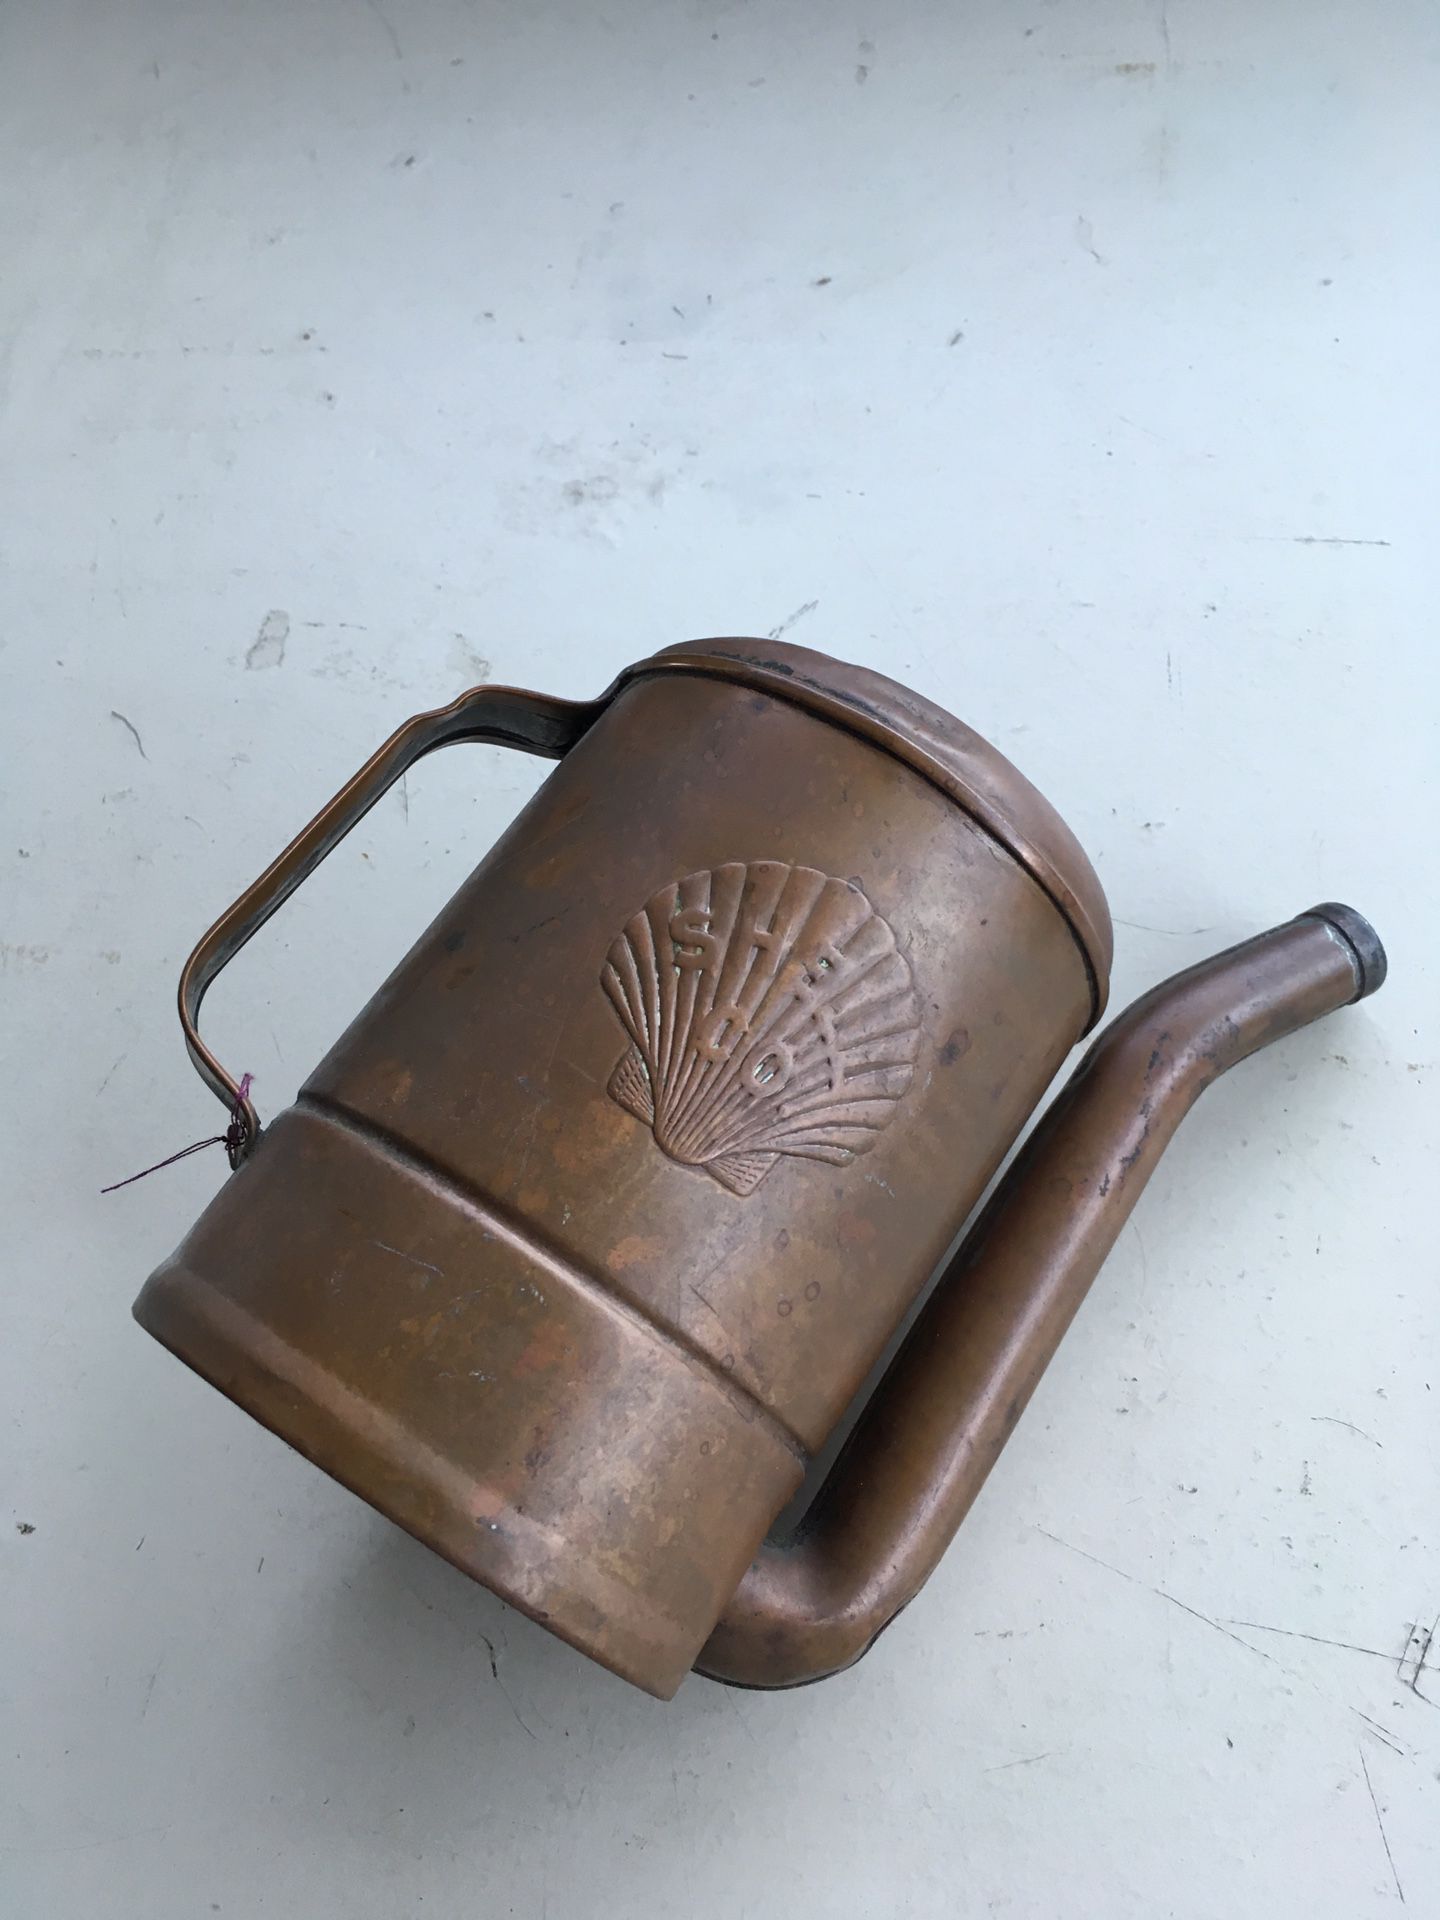 Shell (1)qt swing spout oil can. SHELL. CO is embossed on side of can. Oil Can is copper color. Pickup and cash only!! Price is firm!